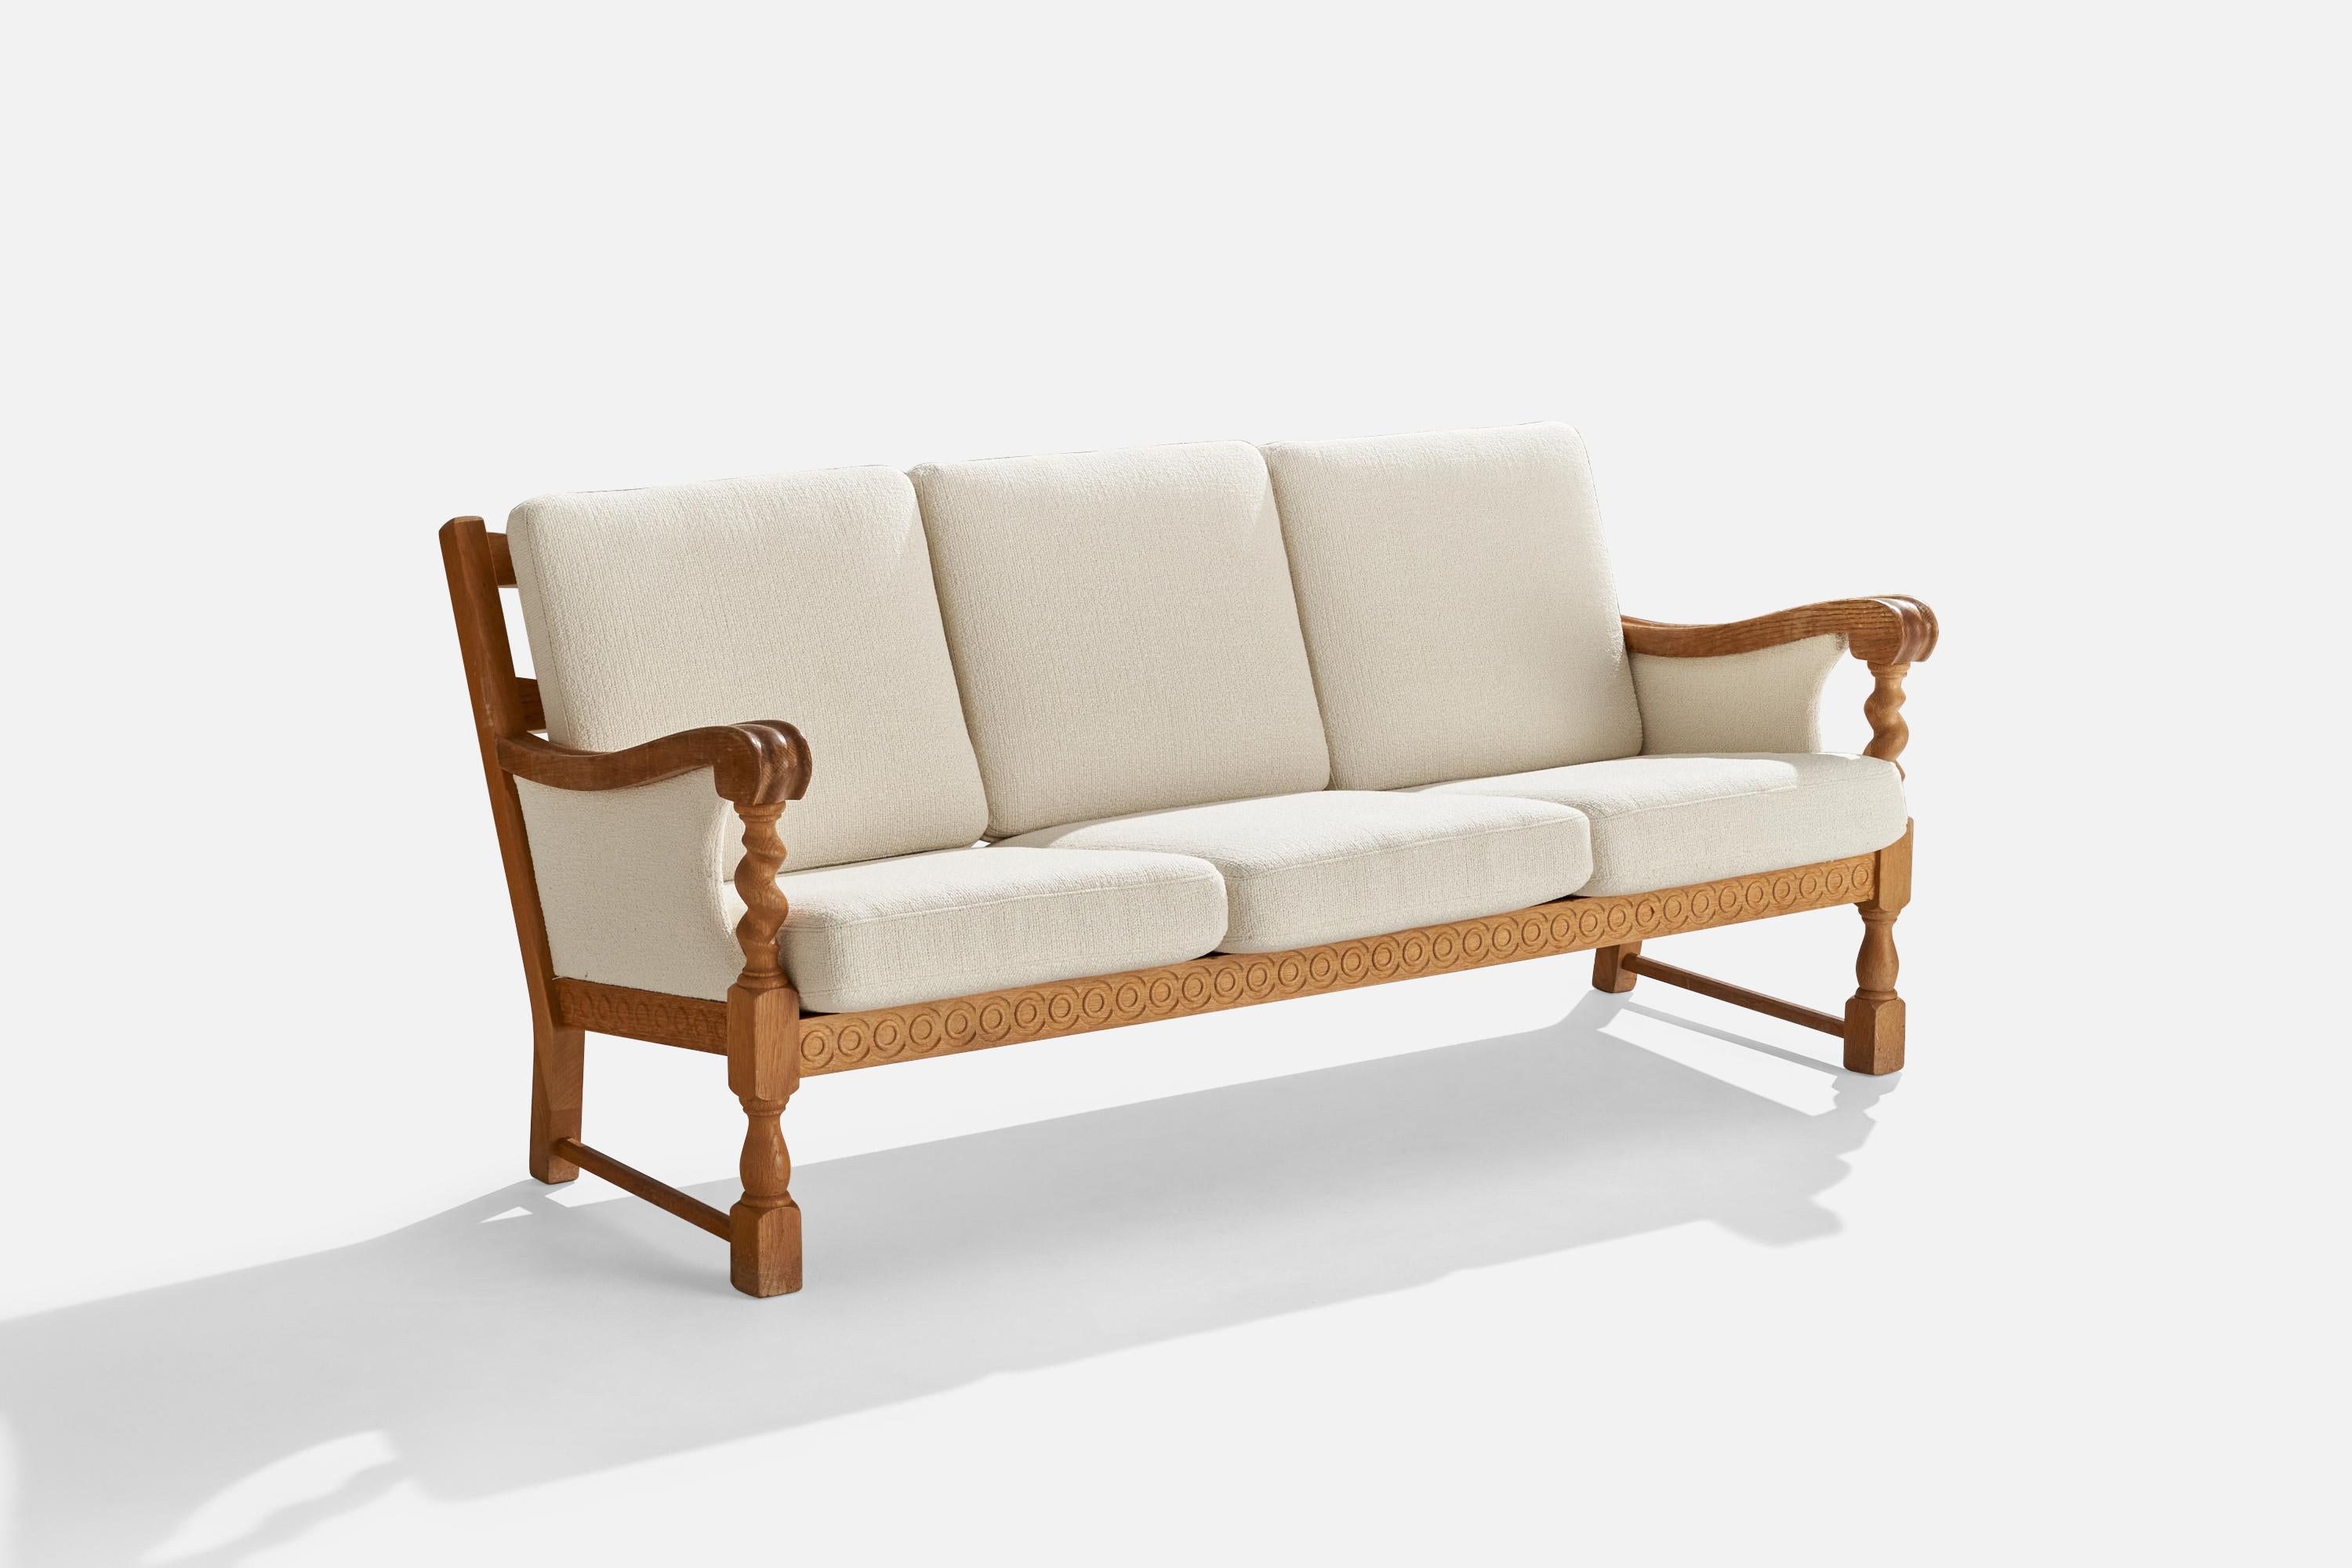 An oak and white fabric sofa designed and produced in Denmark, c. 1960s.

Seat height: 17”